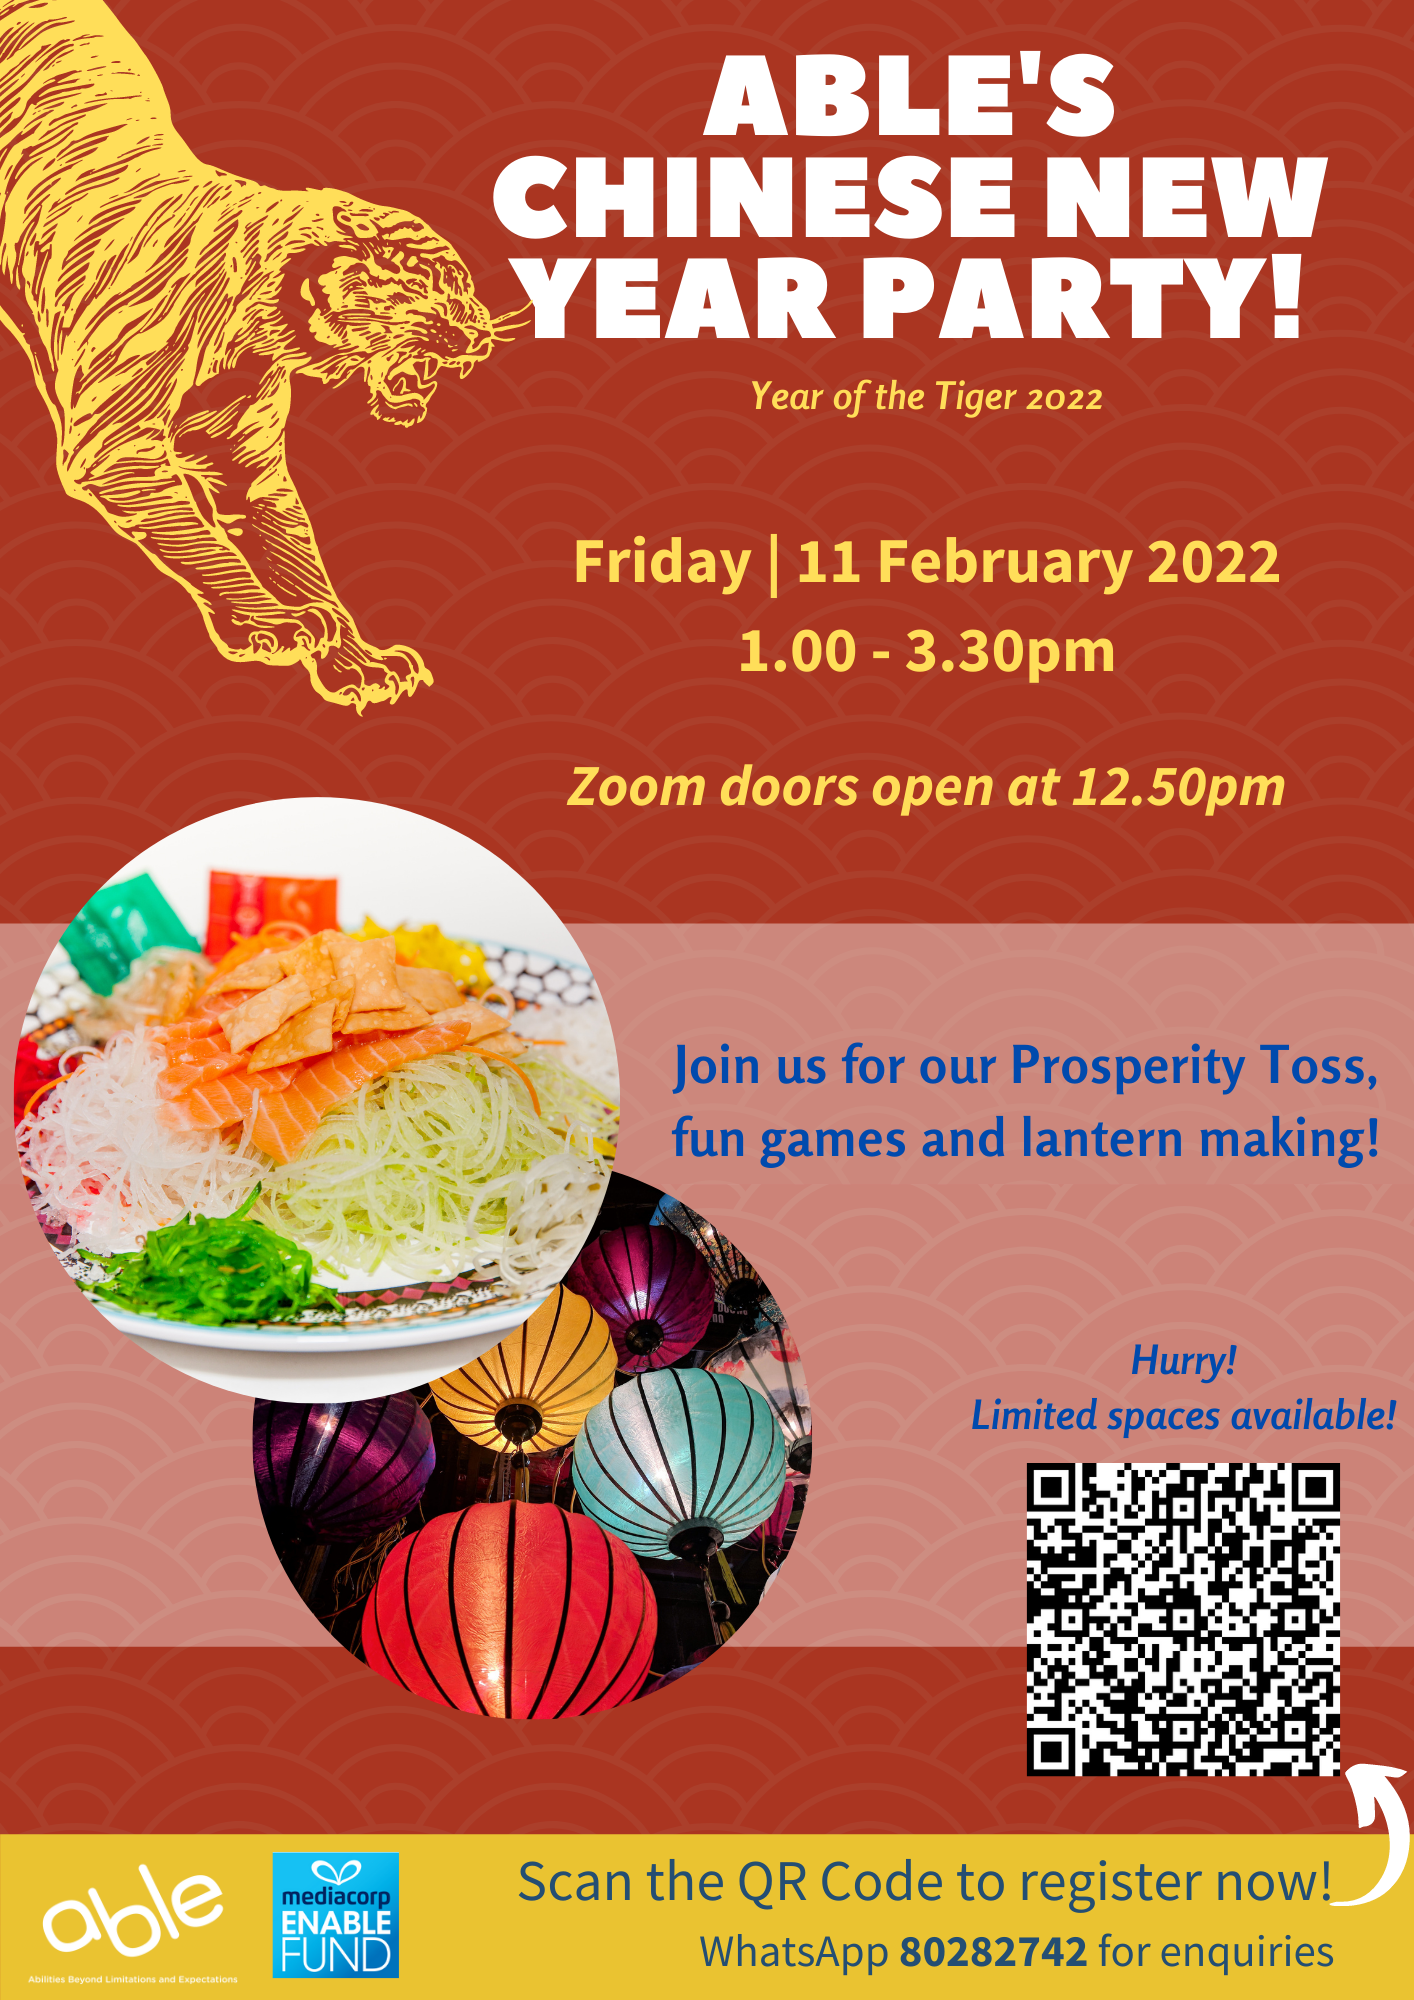 ABLE's Chinese New Year Party!